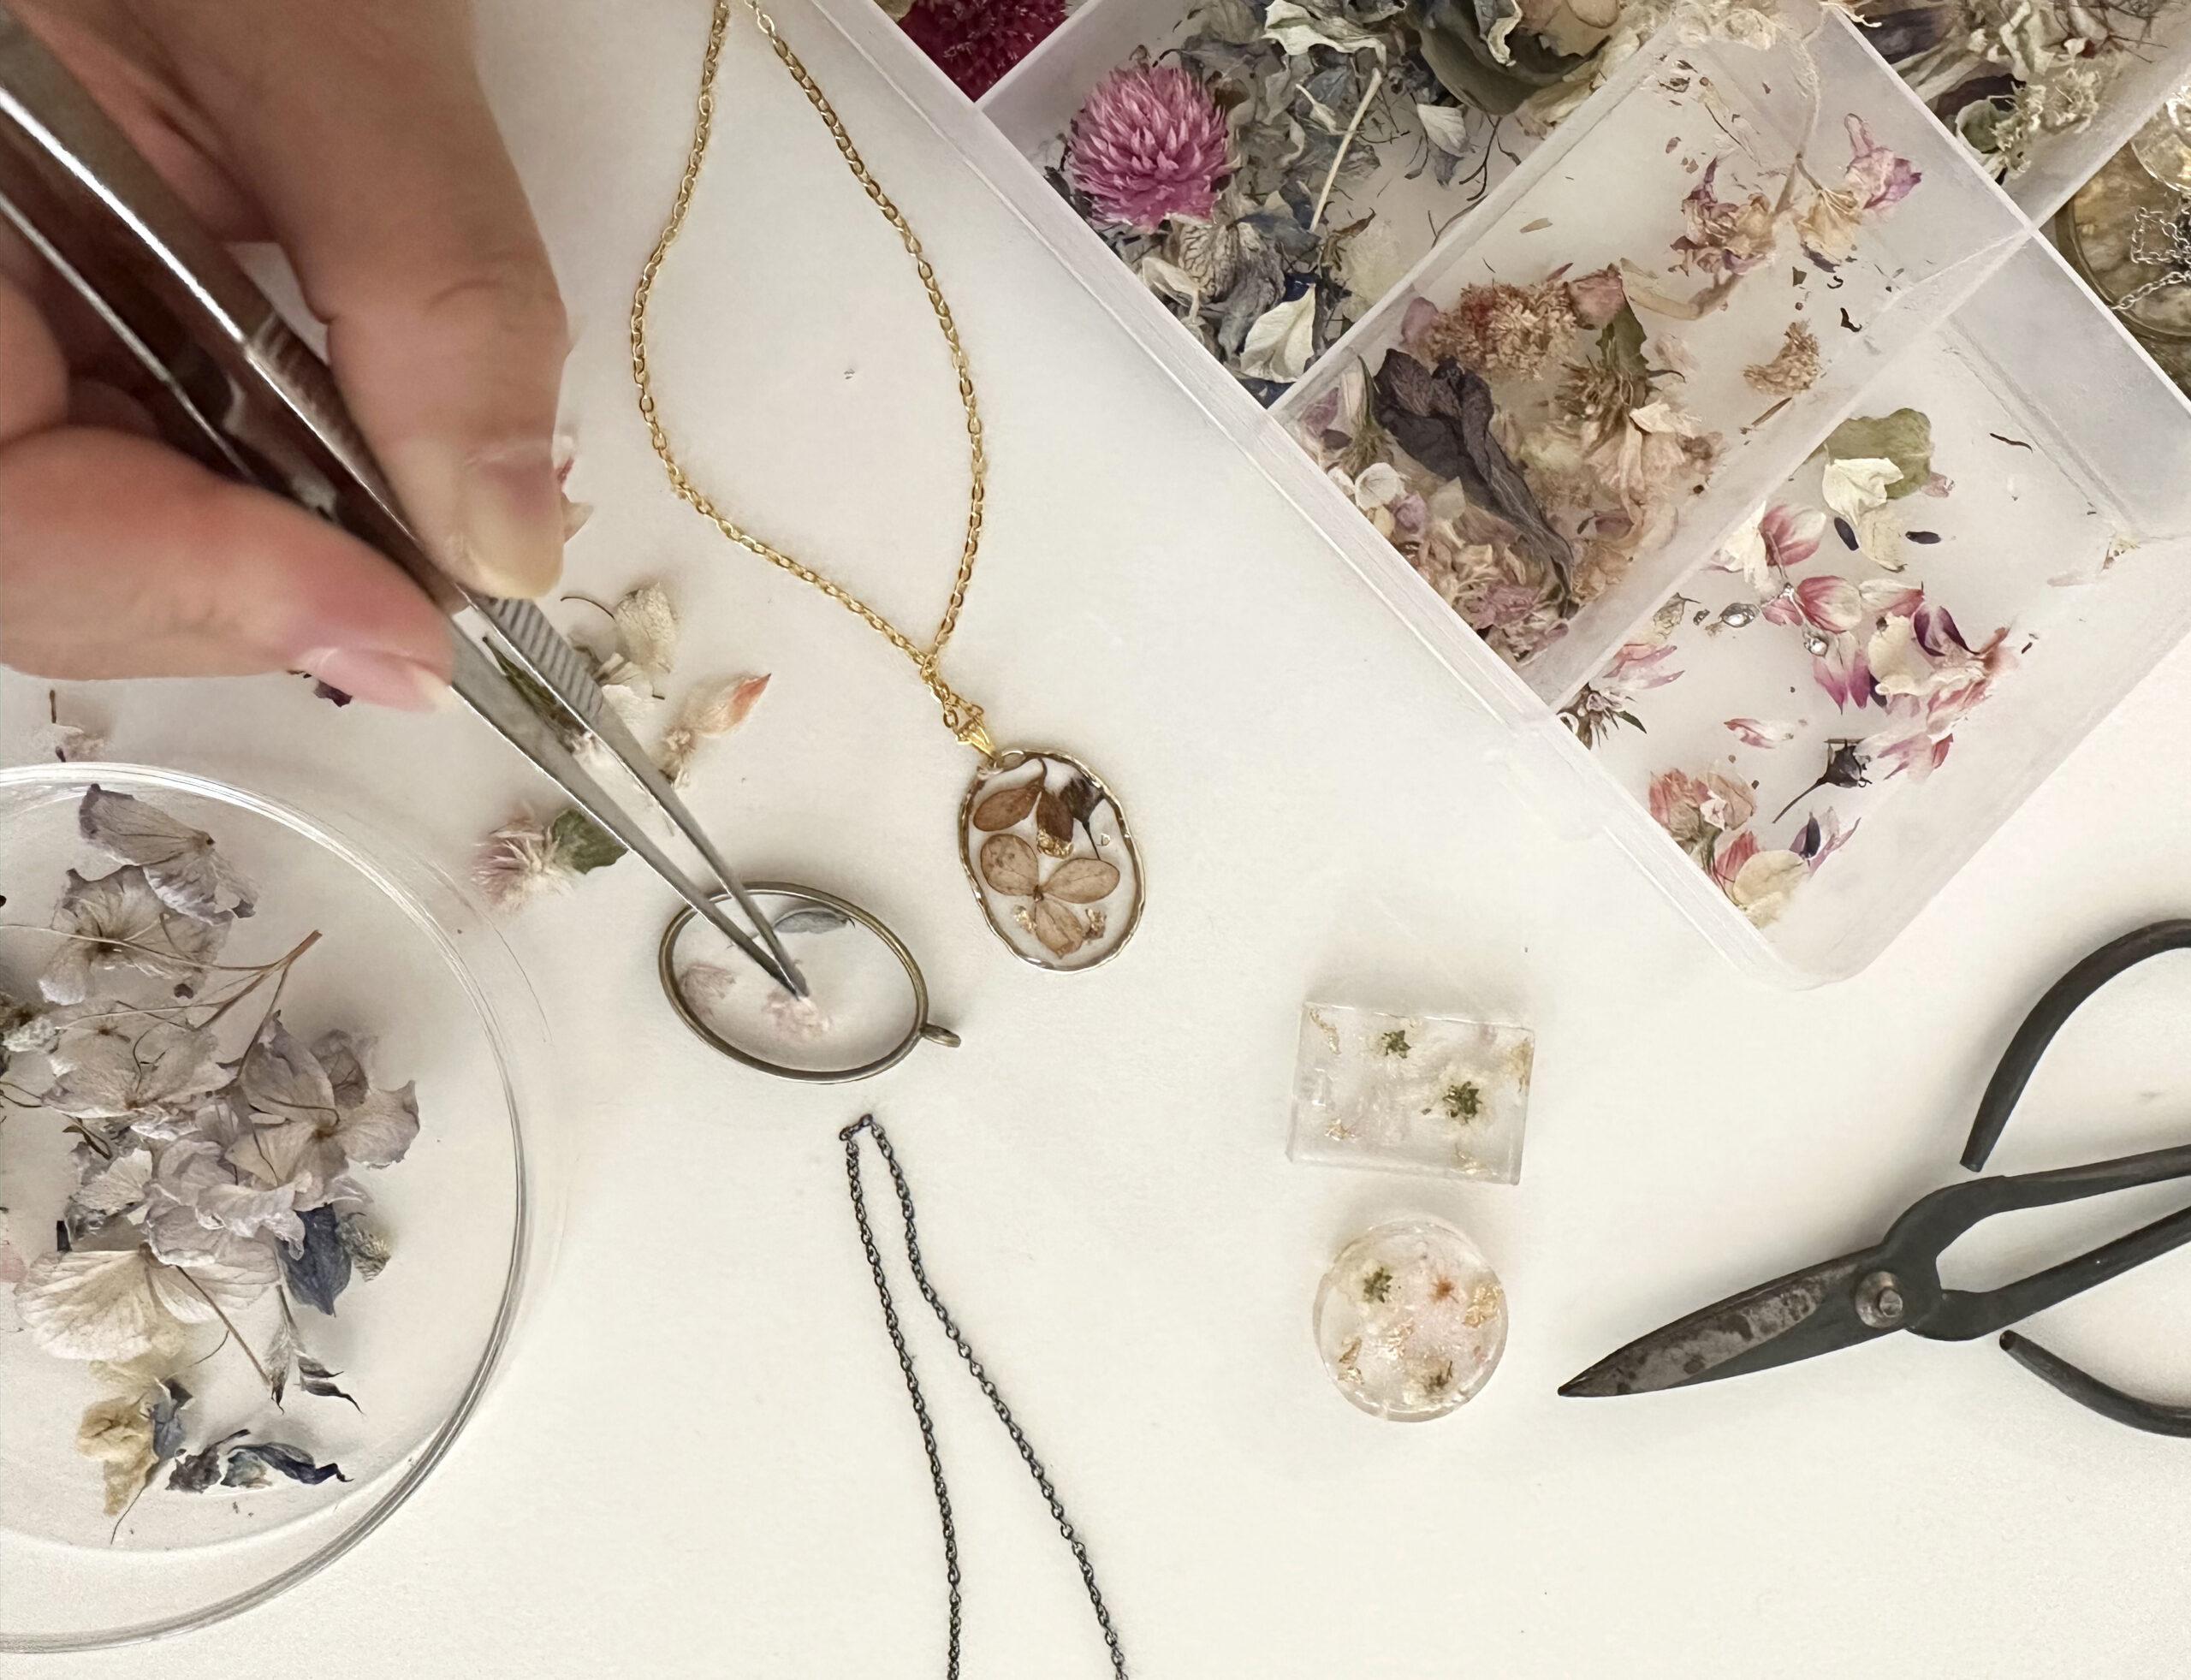 A person uses tweezers to put a dried flower in a piece of jewelry.